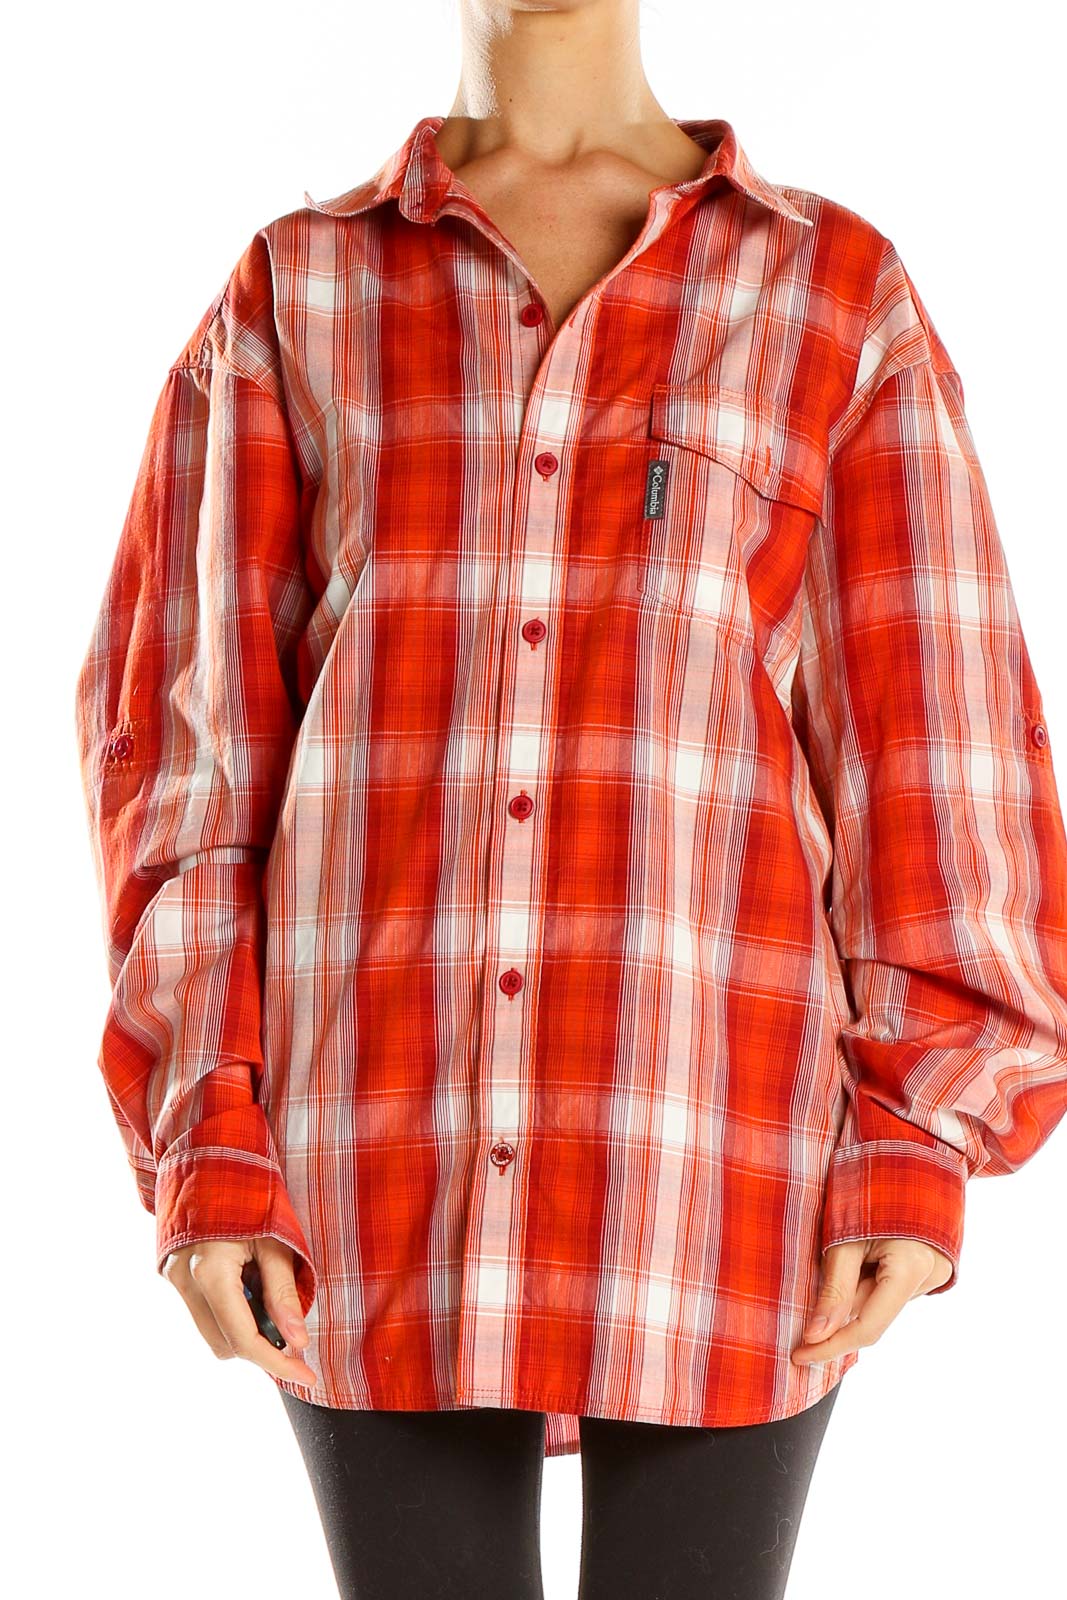 Red Plaid Top Front